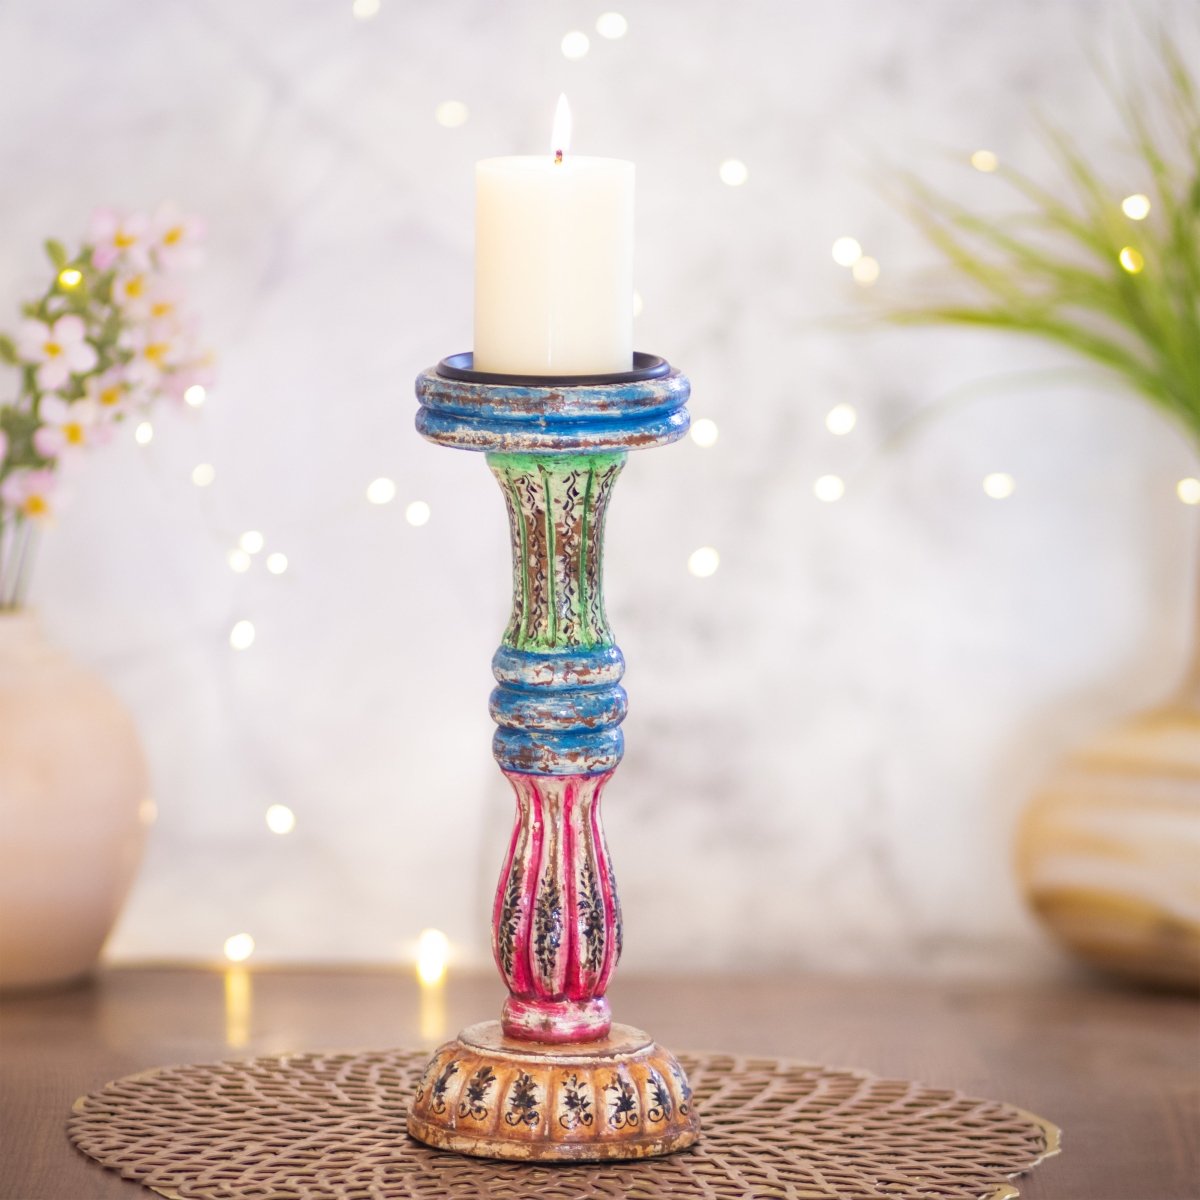 Kezevel Wooden Candle Stand - Antique Distressed Handcrafted Multicolour Candle Holders for Home Decor, Pillar Candle Holder